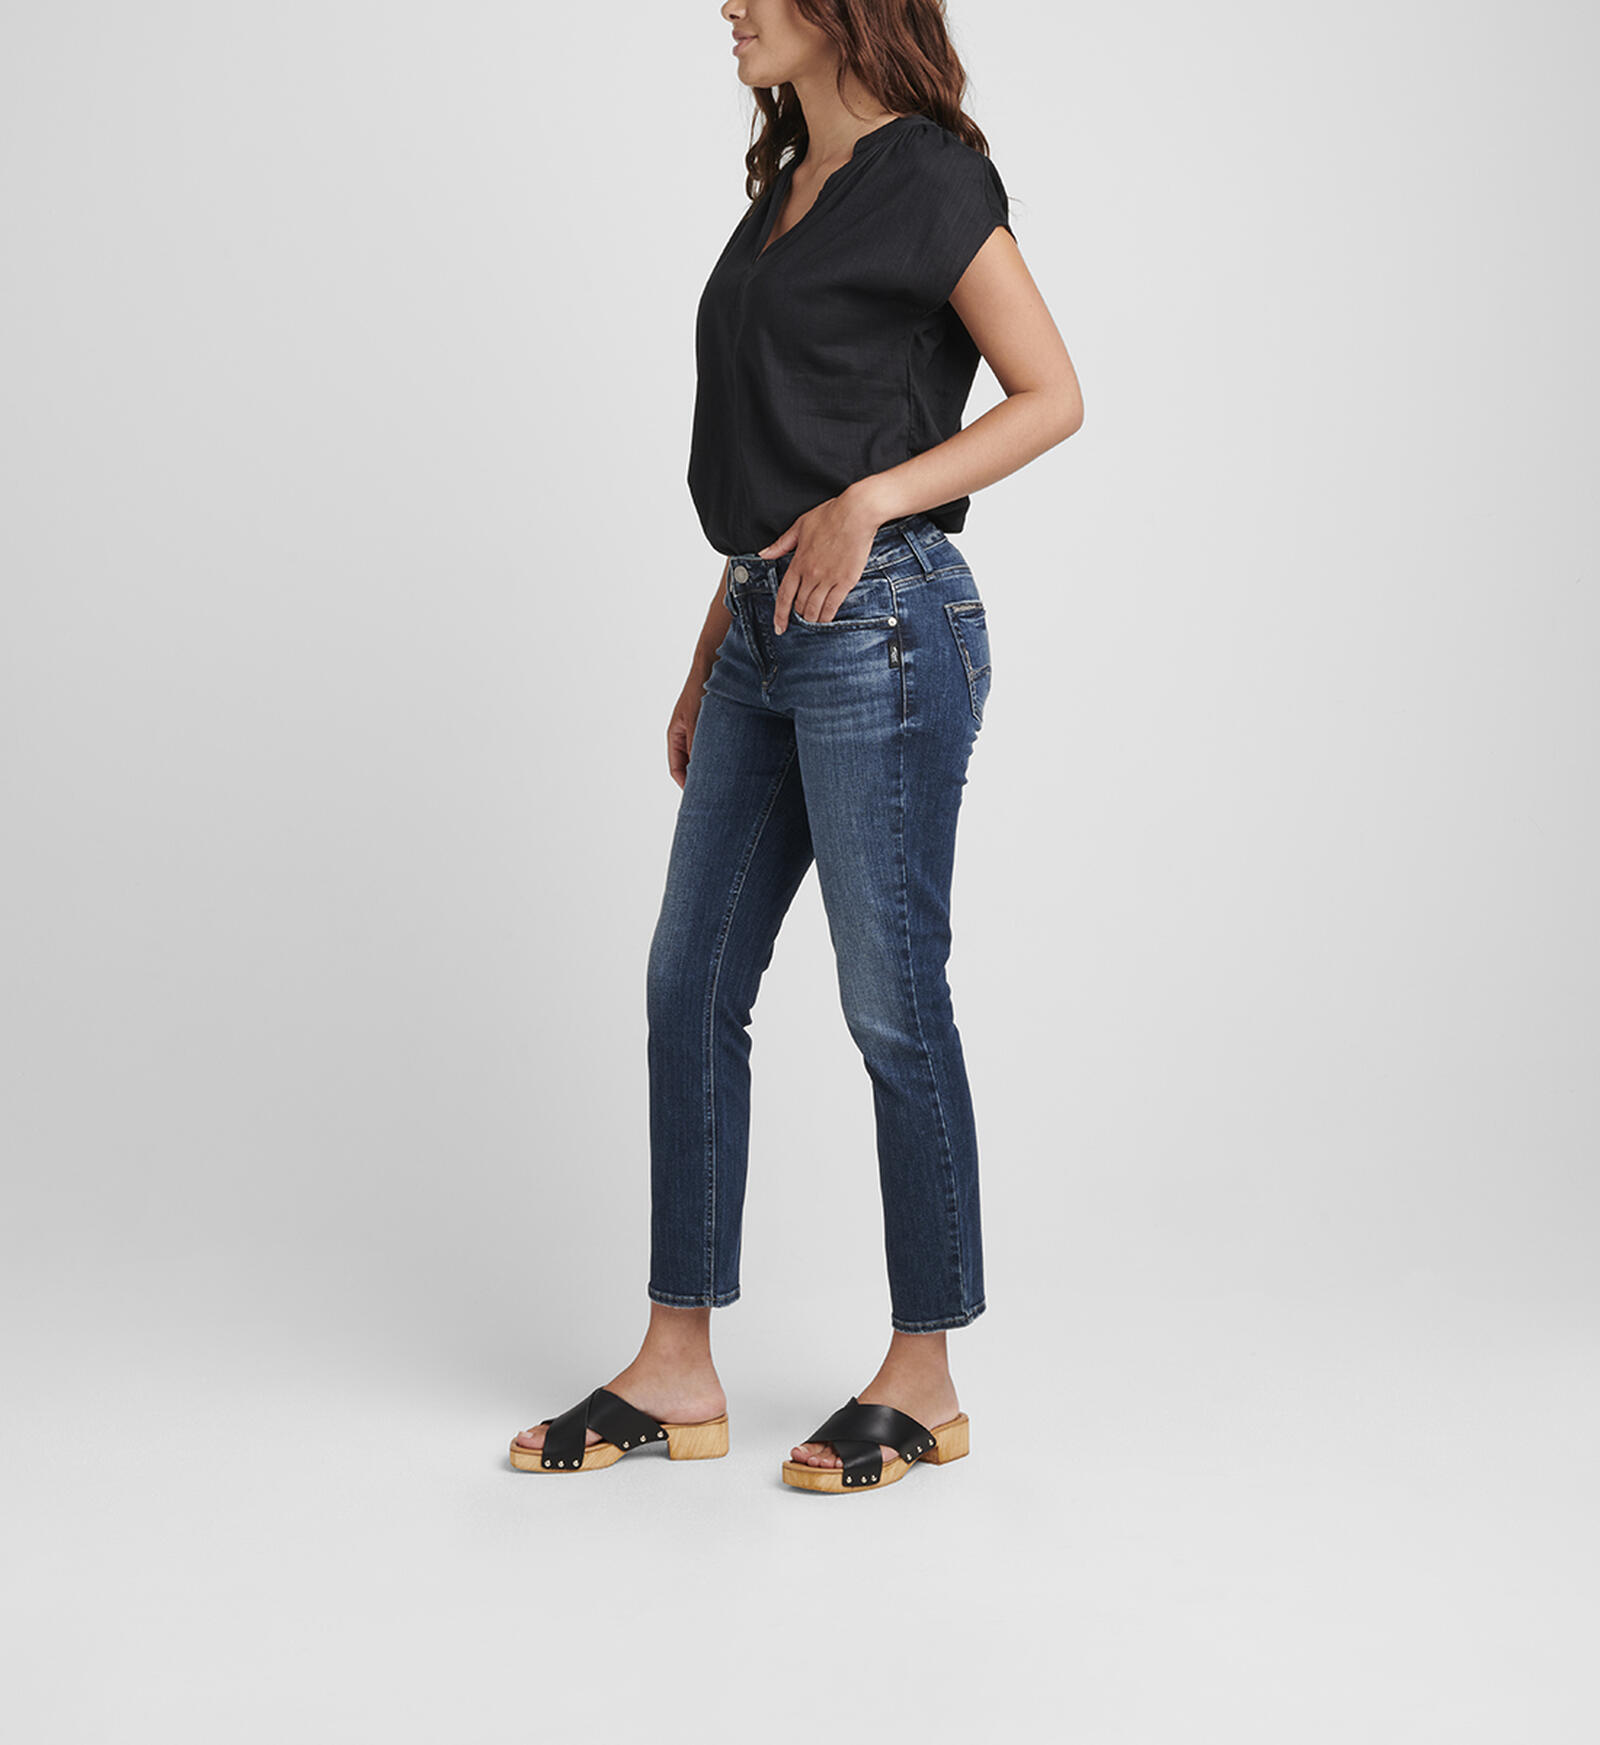 Buy Elyse Mid Rise Straight Crop Jeans for USD 78.00